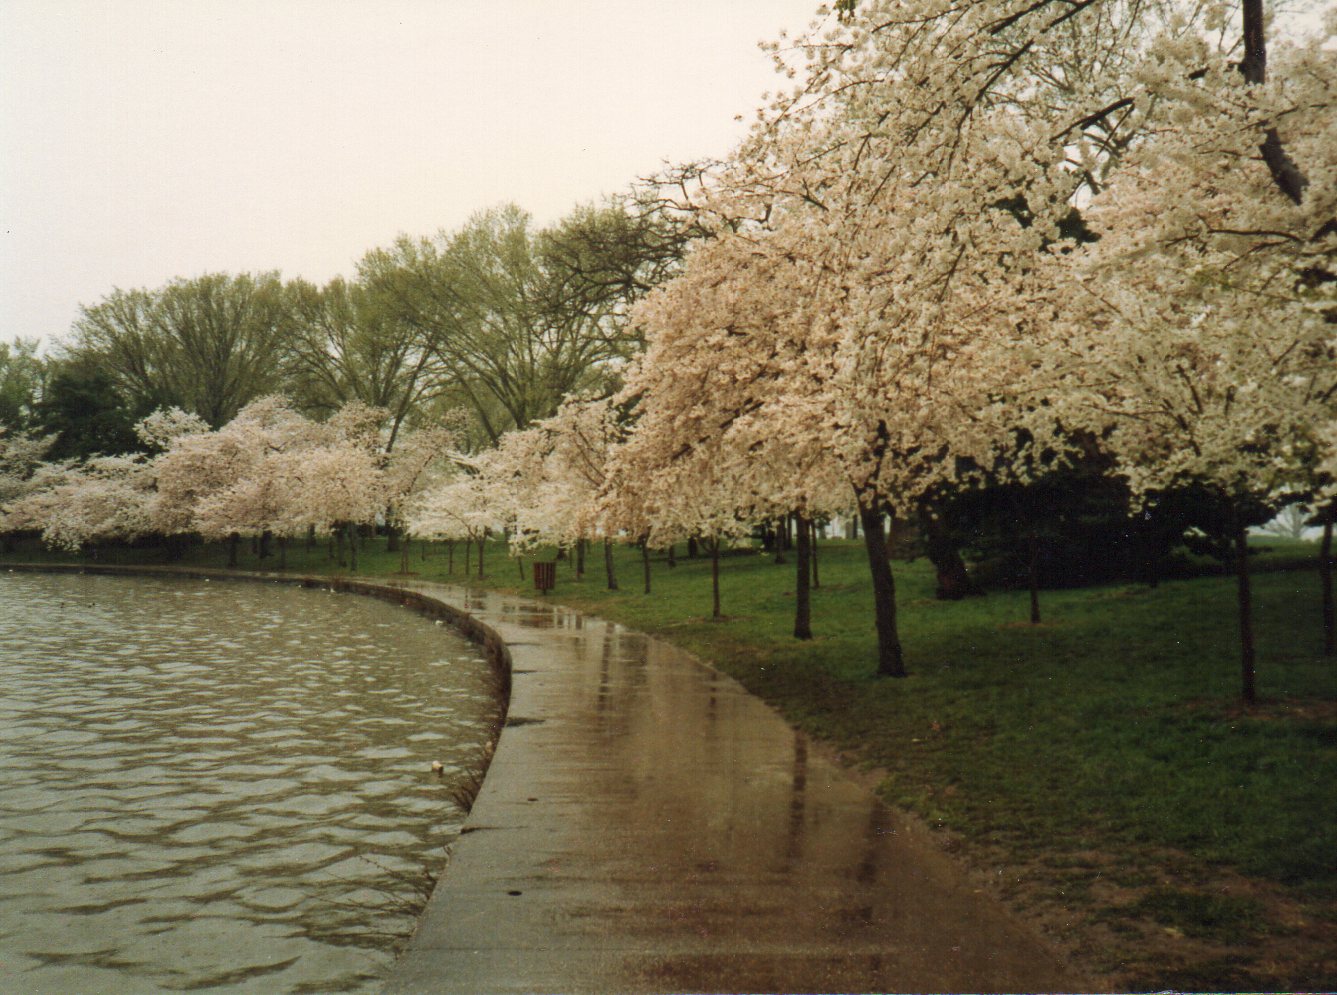 Cherry Blossoms on a rainy day